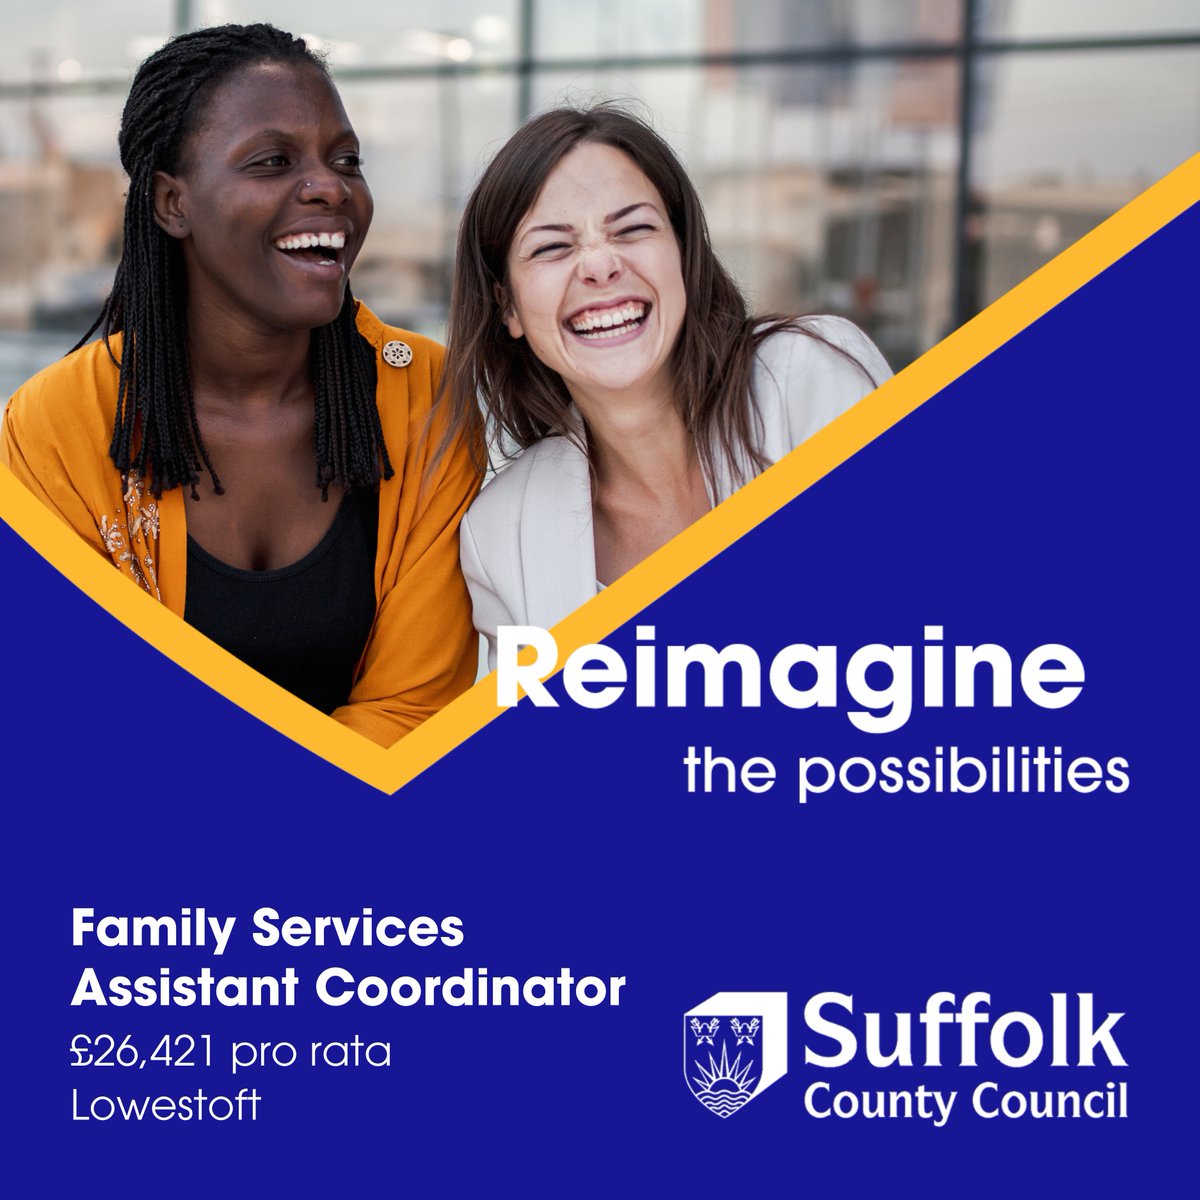 Family Services Assistant Coordinator
@suffolkcc - Lowestoft, NR33 0EQ / Hybrid 
£26,421 pa (pro rata if P/T) 
22.2 hpw, Flexible working options, Permanent  

For more info and to apply for this job, visit:
suffolkjobsdirect.org/#en/sites/CX_1…

#SuffolkJobs #suffolkjobsdirect